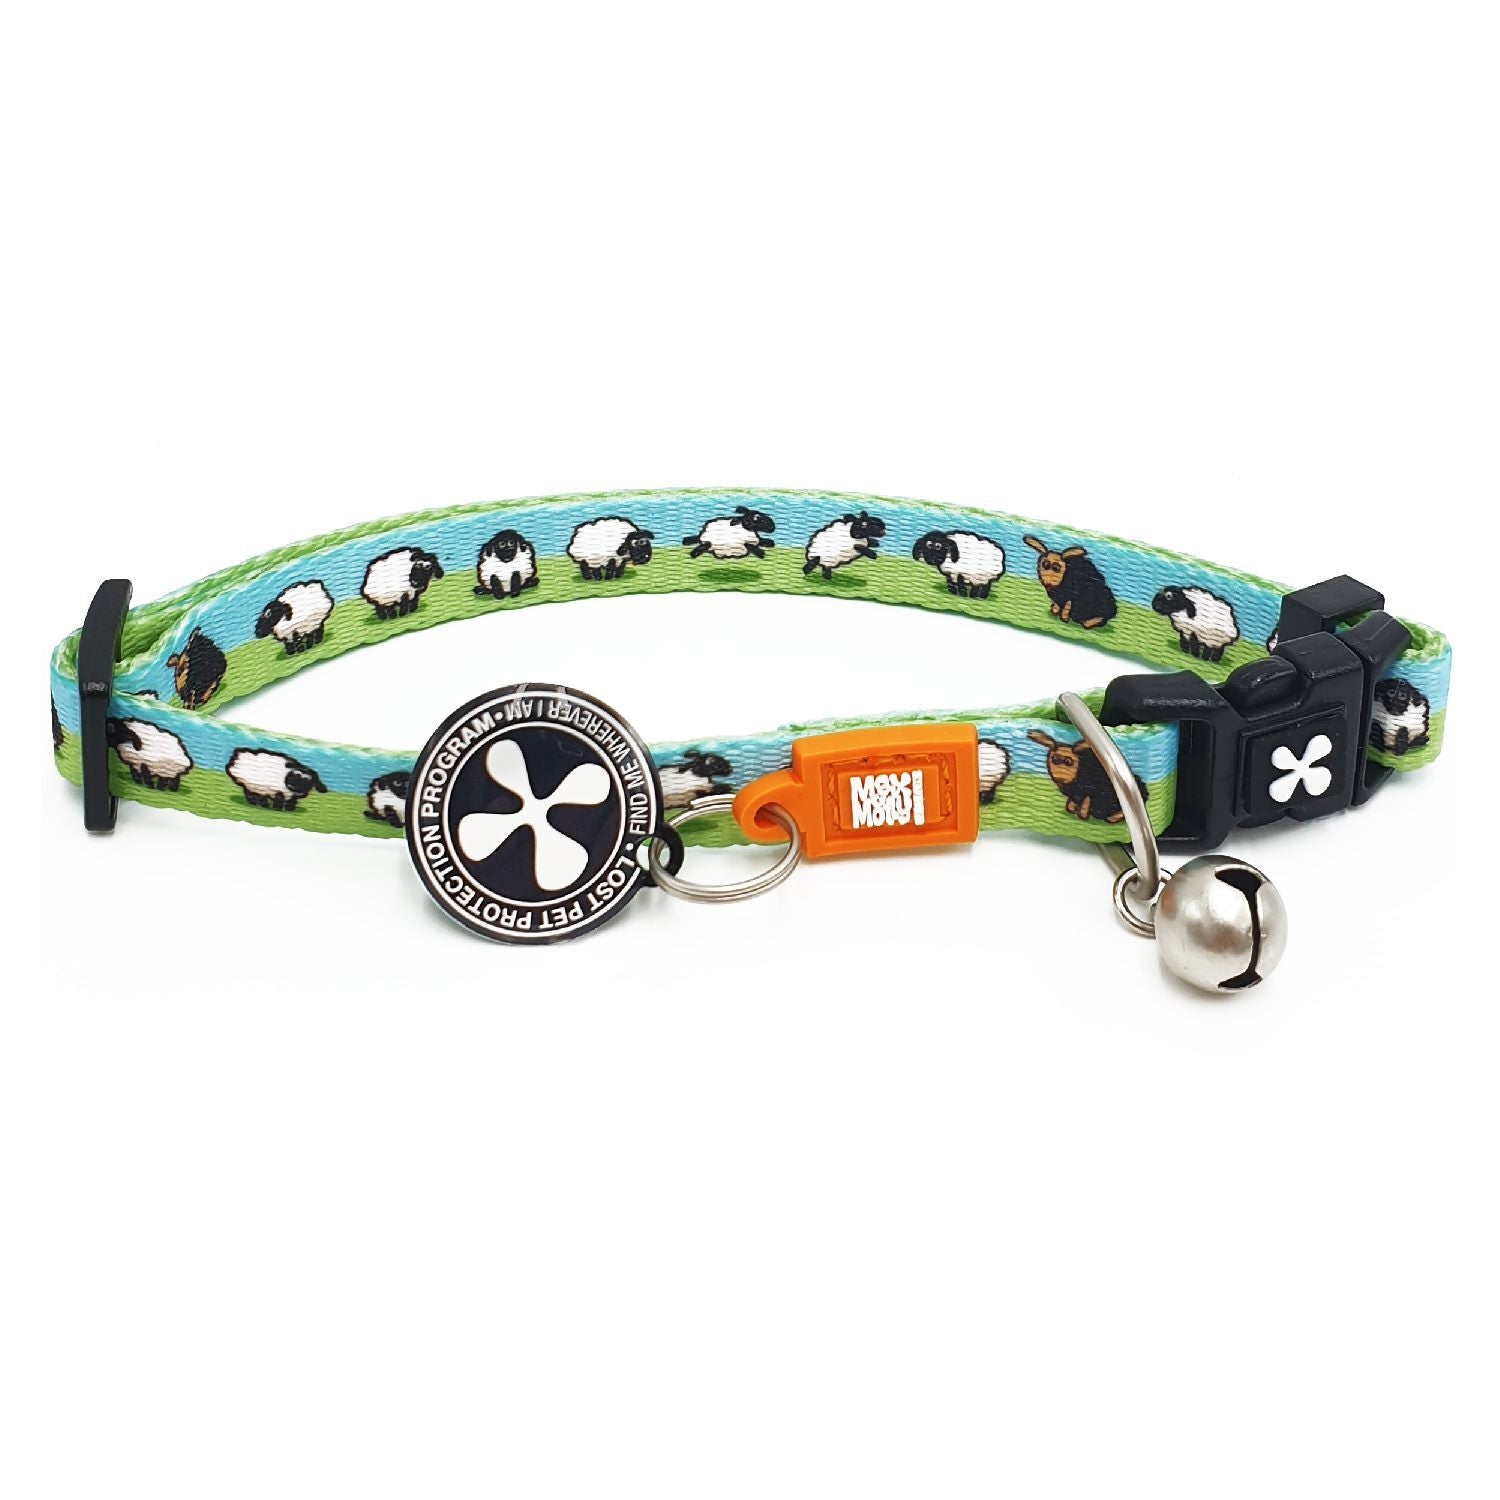 Max & Molly Smart ID Cat Collar - Black Sheep - Pets and More